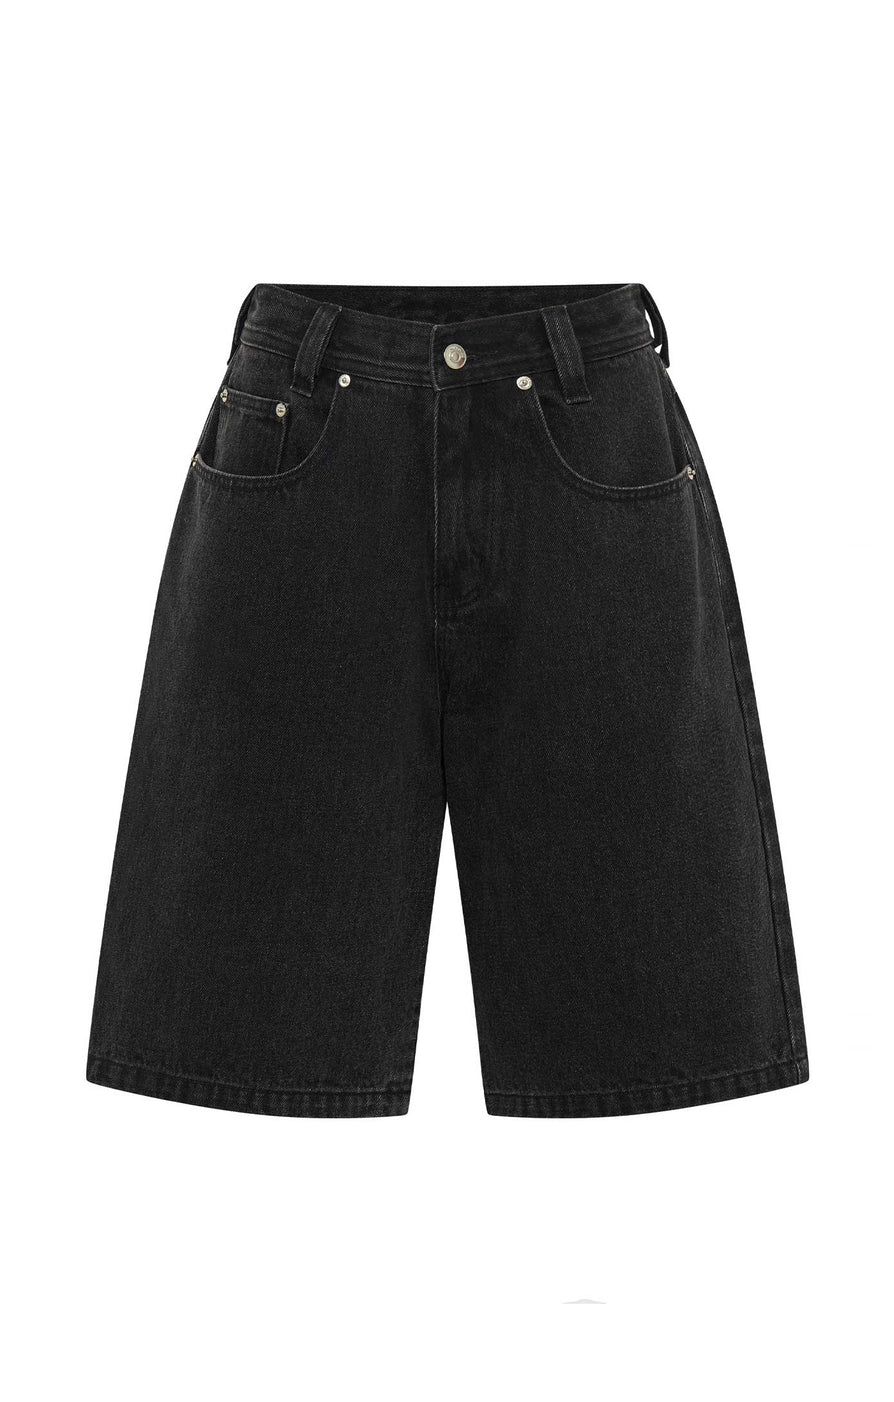 THE MAXWELL SHORT BLACK | ghost